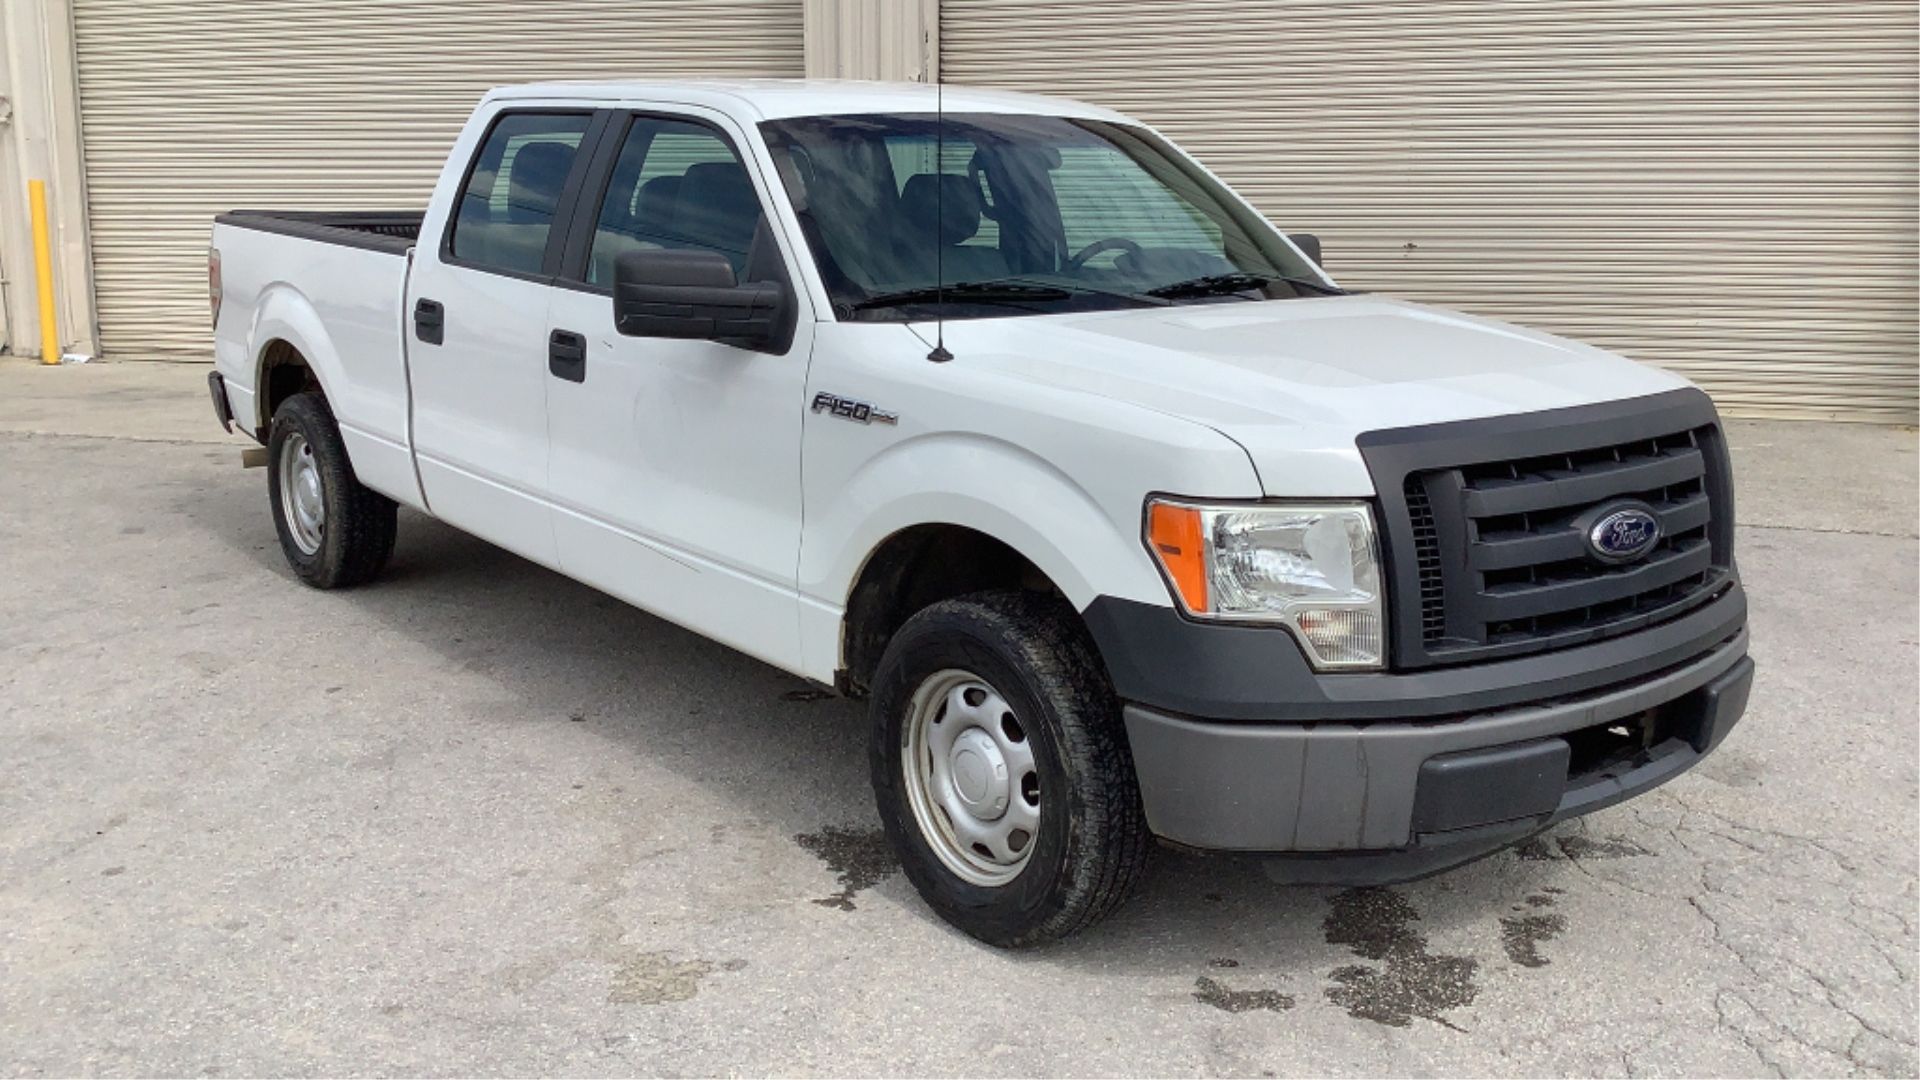 2012 Ford F150 XL Crew Cab 2WD - Image 2 of 86